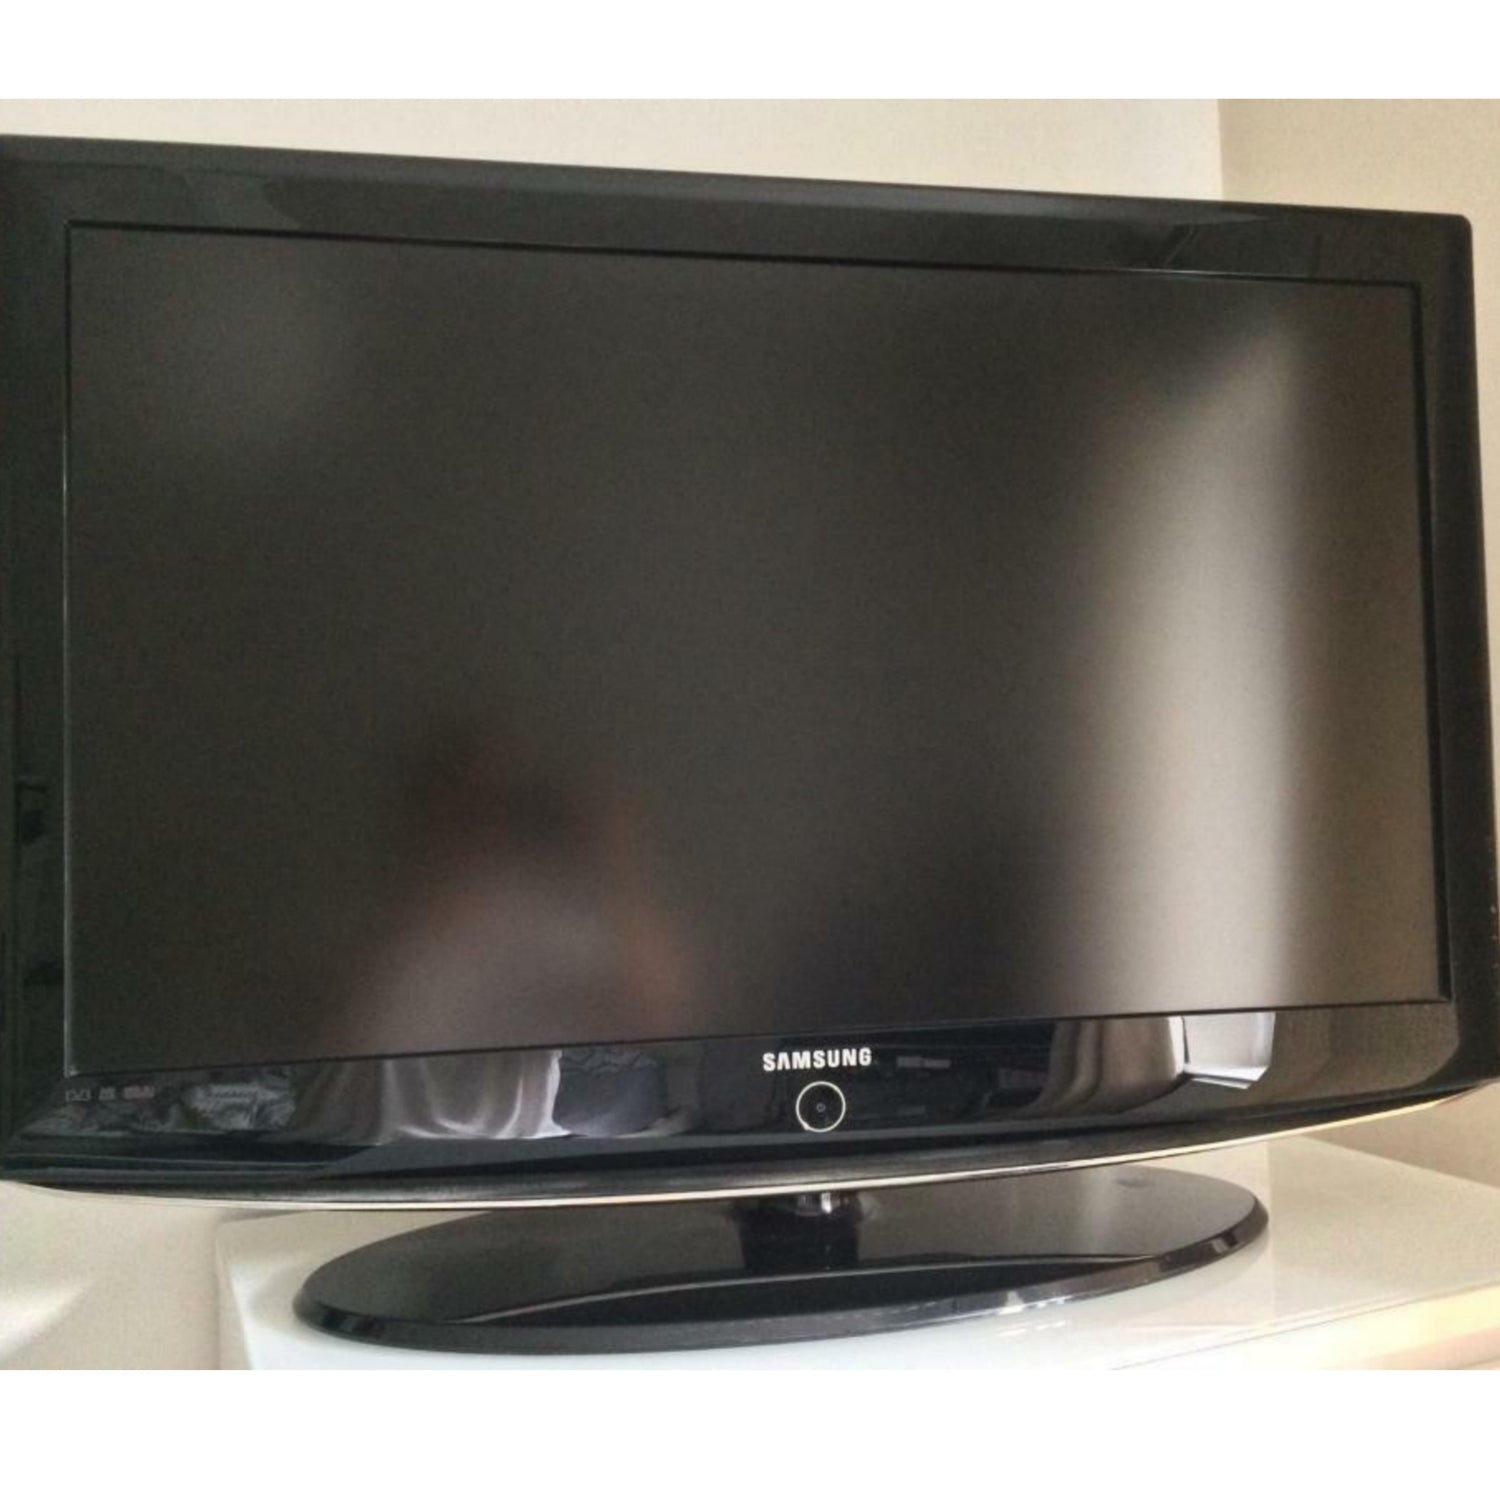 Samsung 37 inch Full HD LCD TV - Foreign Used 